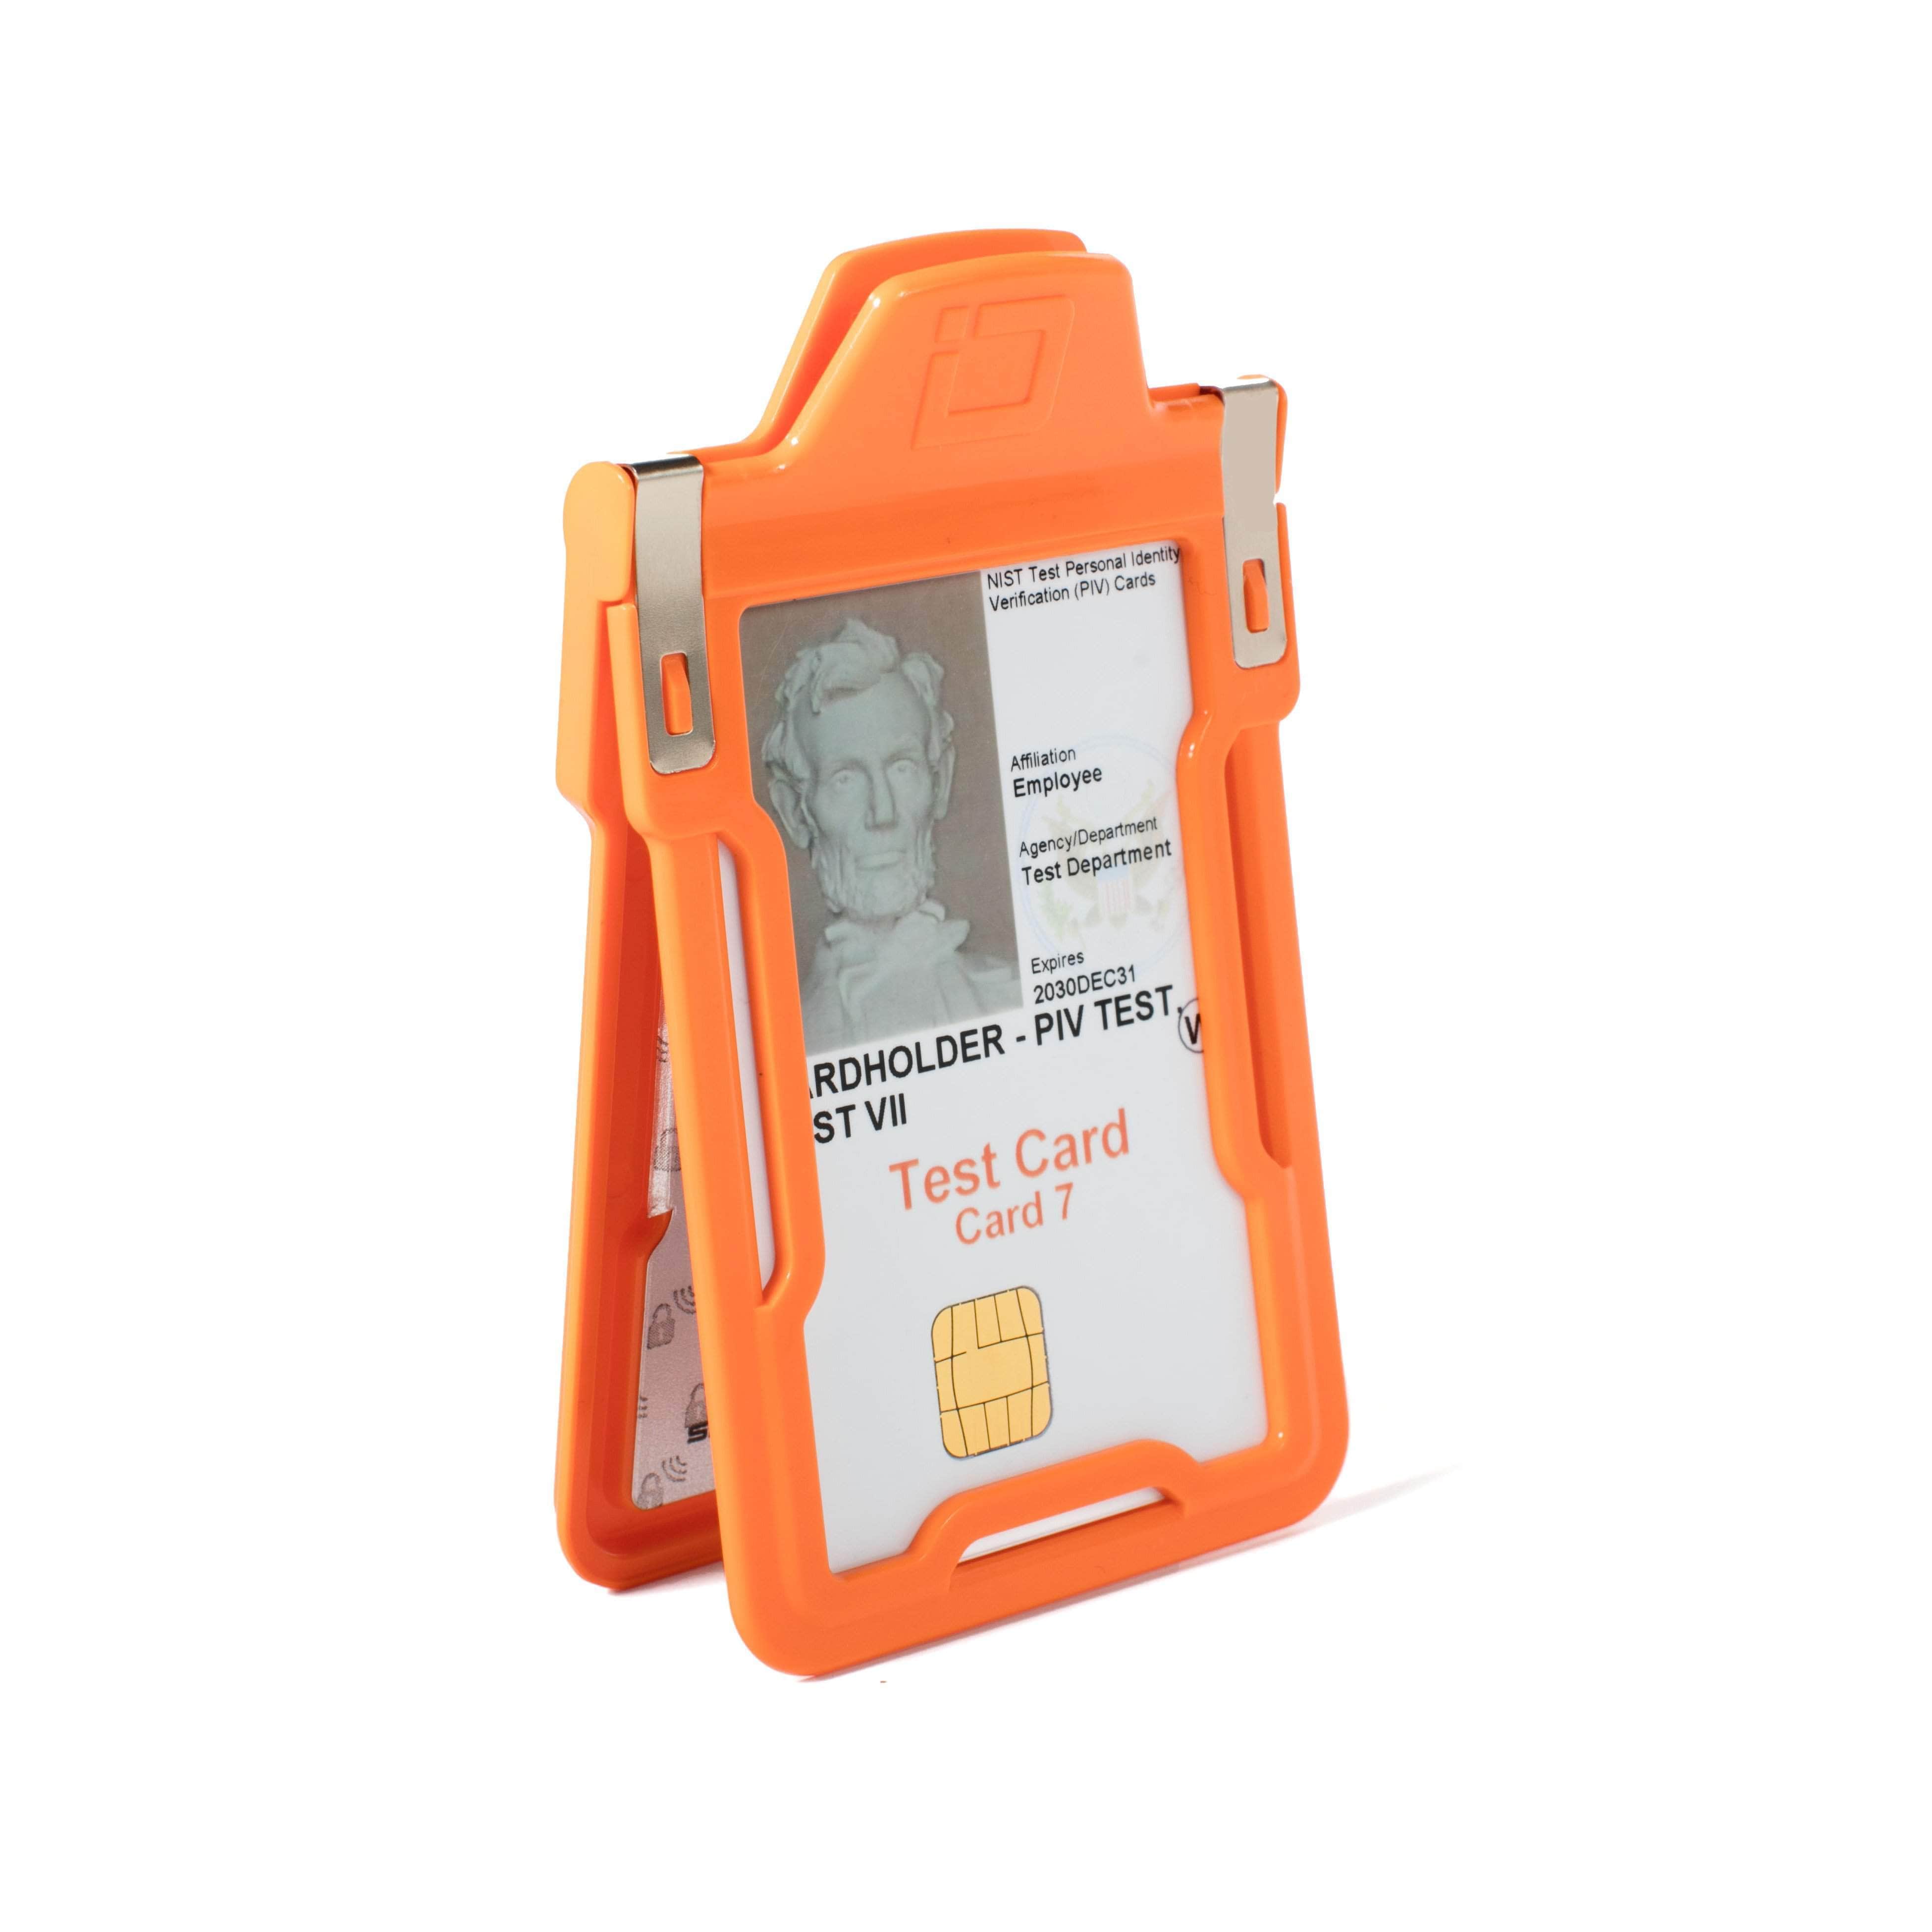 ID Stronghold Badgeholder BloxProx Orange Secure Badge Holder with BloxProx™ - Protects 125Khz HID Prox 1 Card Holder